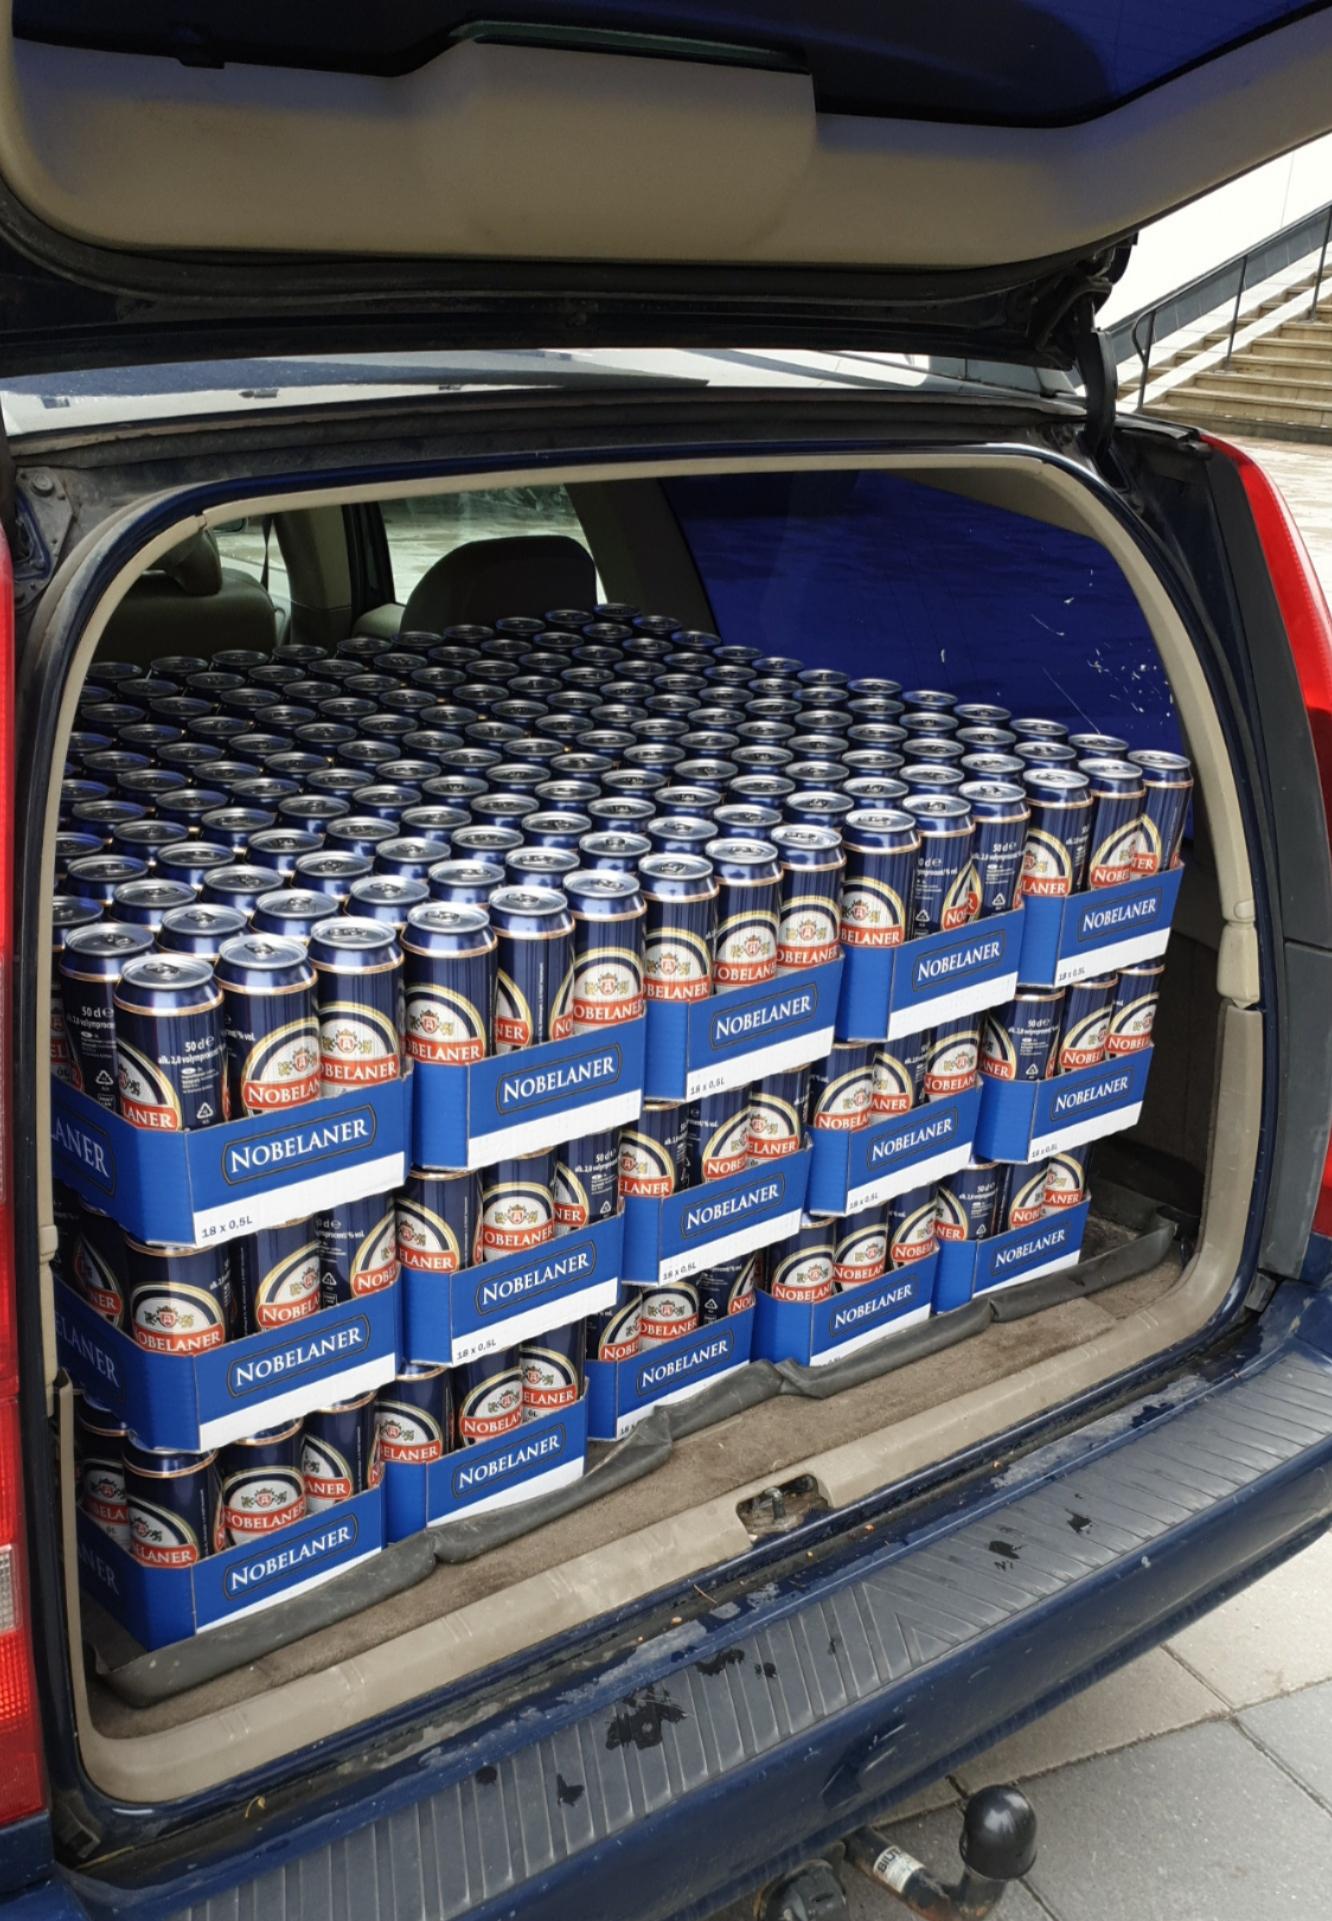 540 cans of beer in the boot... 540 cans of beer...